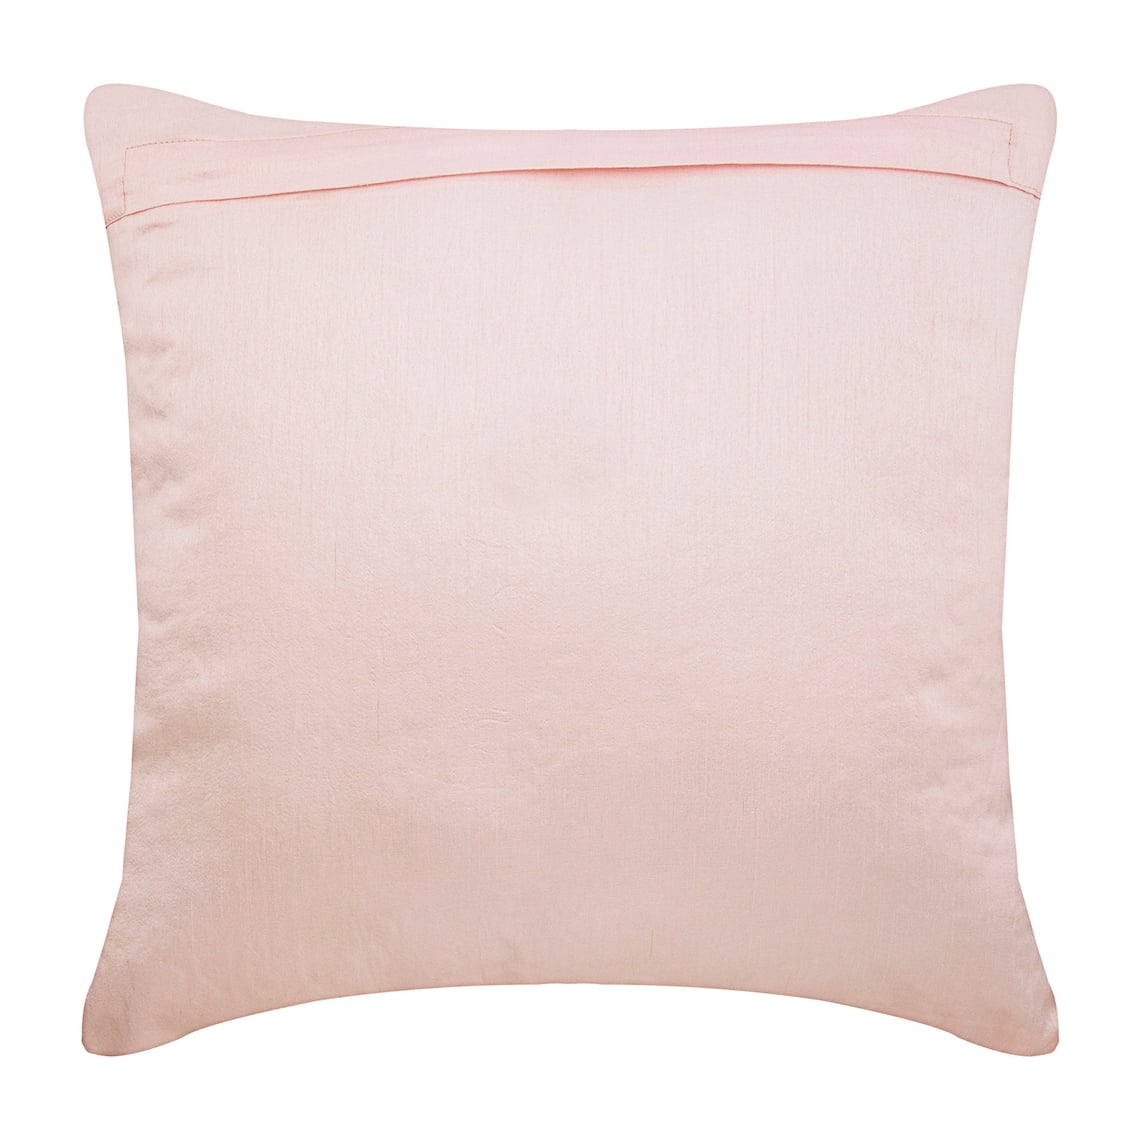 UKZMN Set of 4 18x18 Fashion Throw Pillow Covers Pink Glam Bedroom Decor Cute Preppy Decorative Pillow Covers Bed Couch Sofa Soft Glitter Perfume